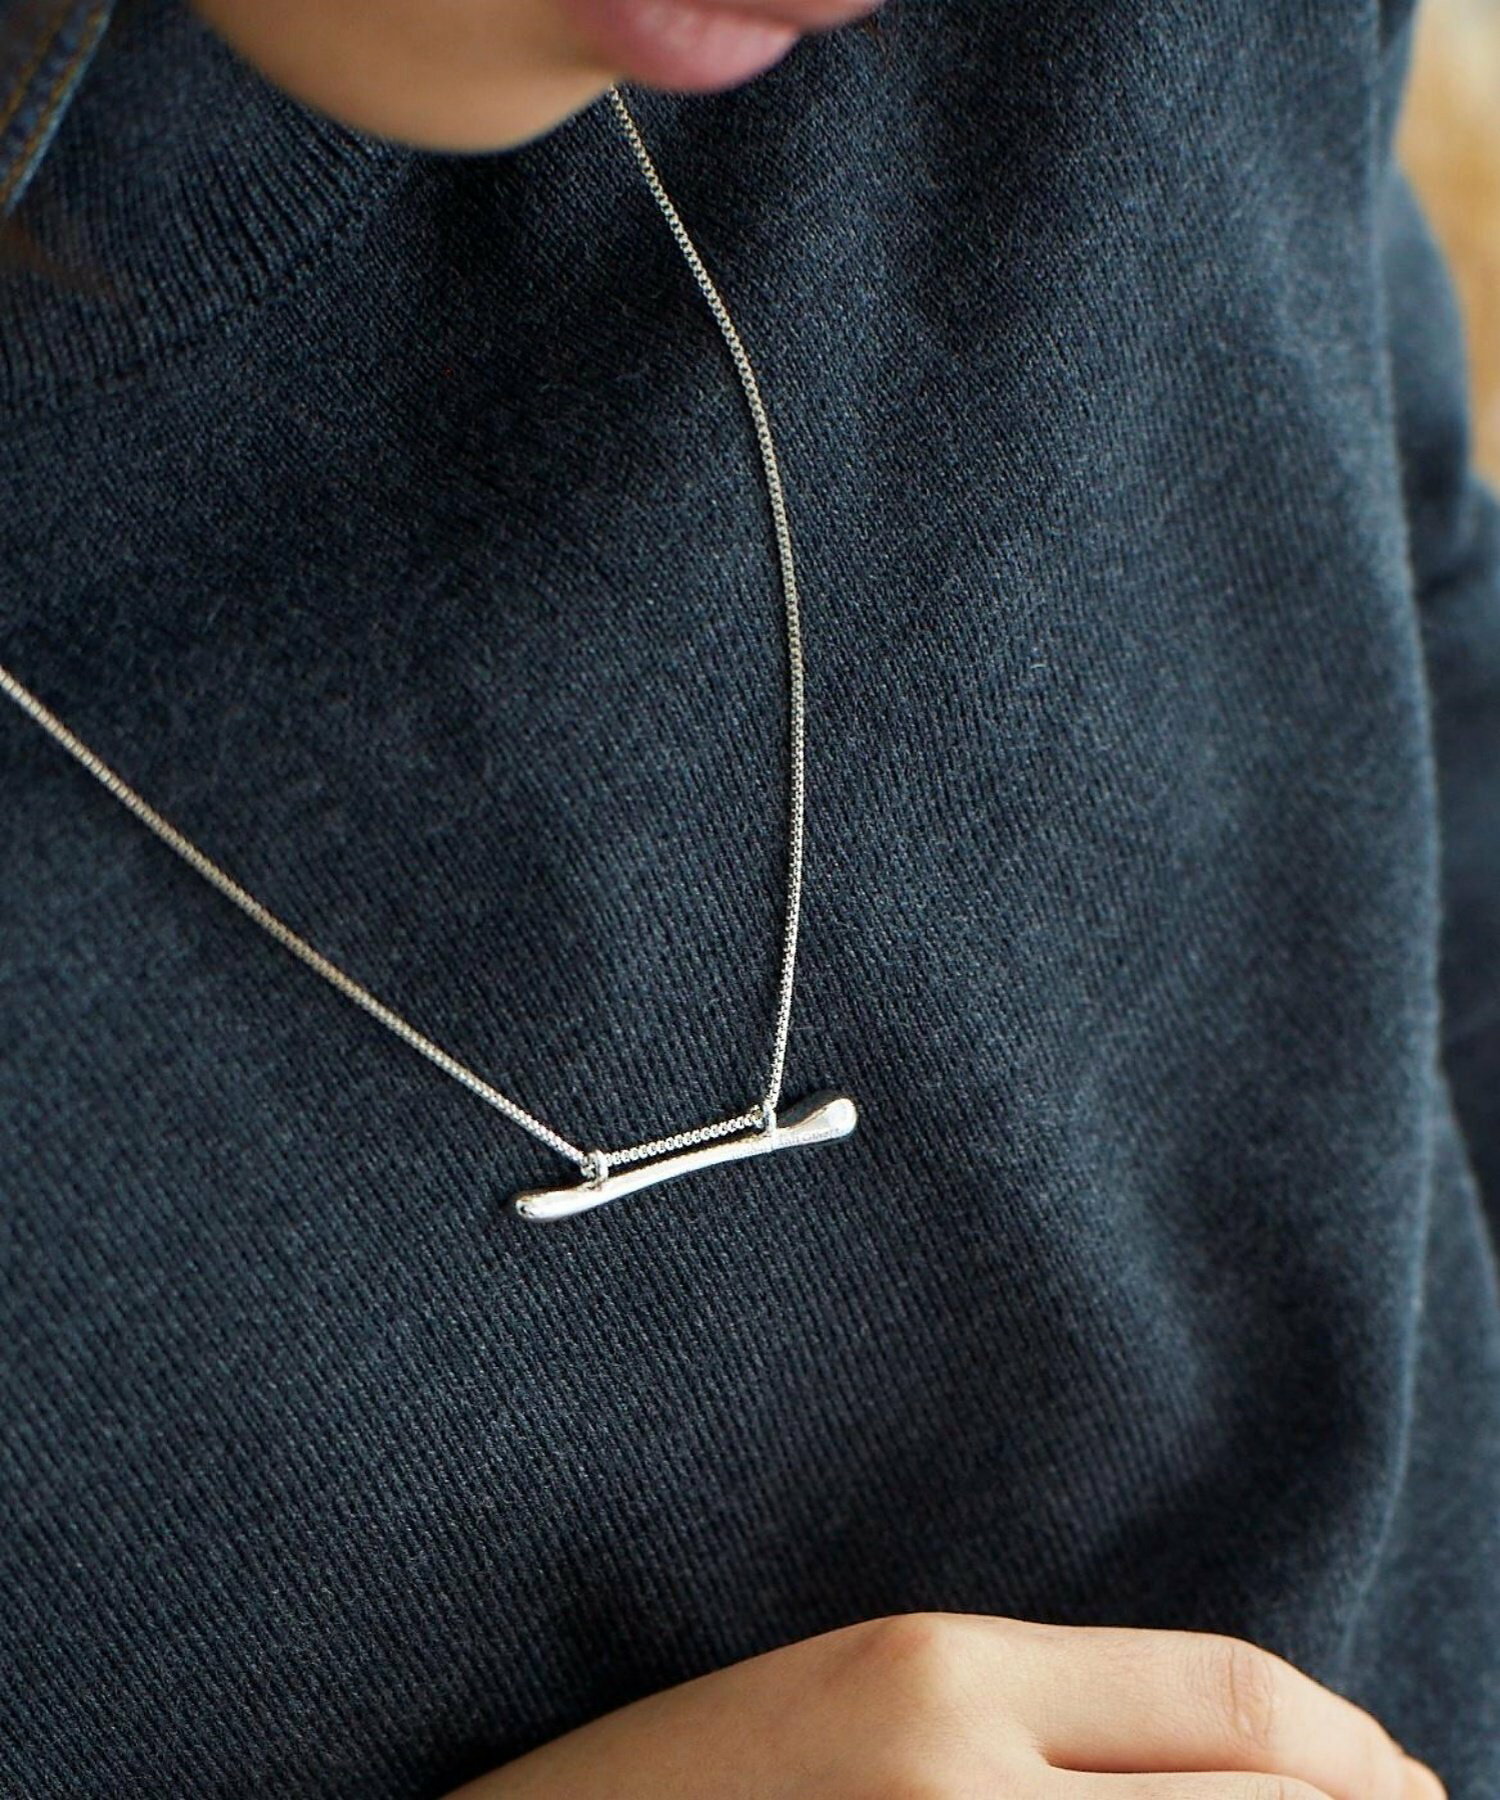 Nothing And Others/Nuance stick Necklace